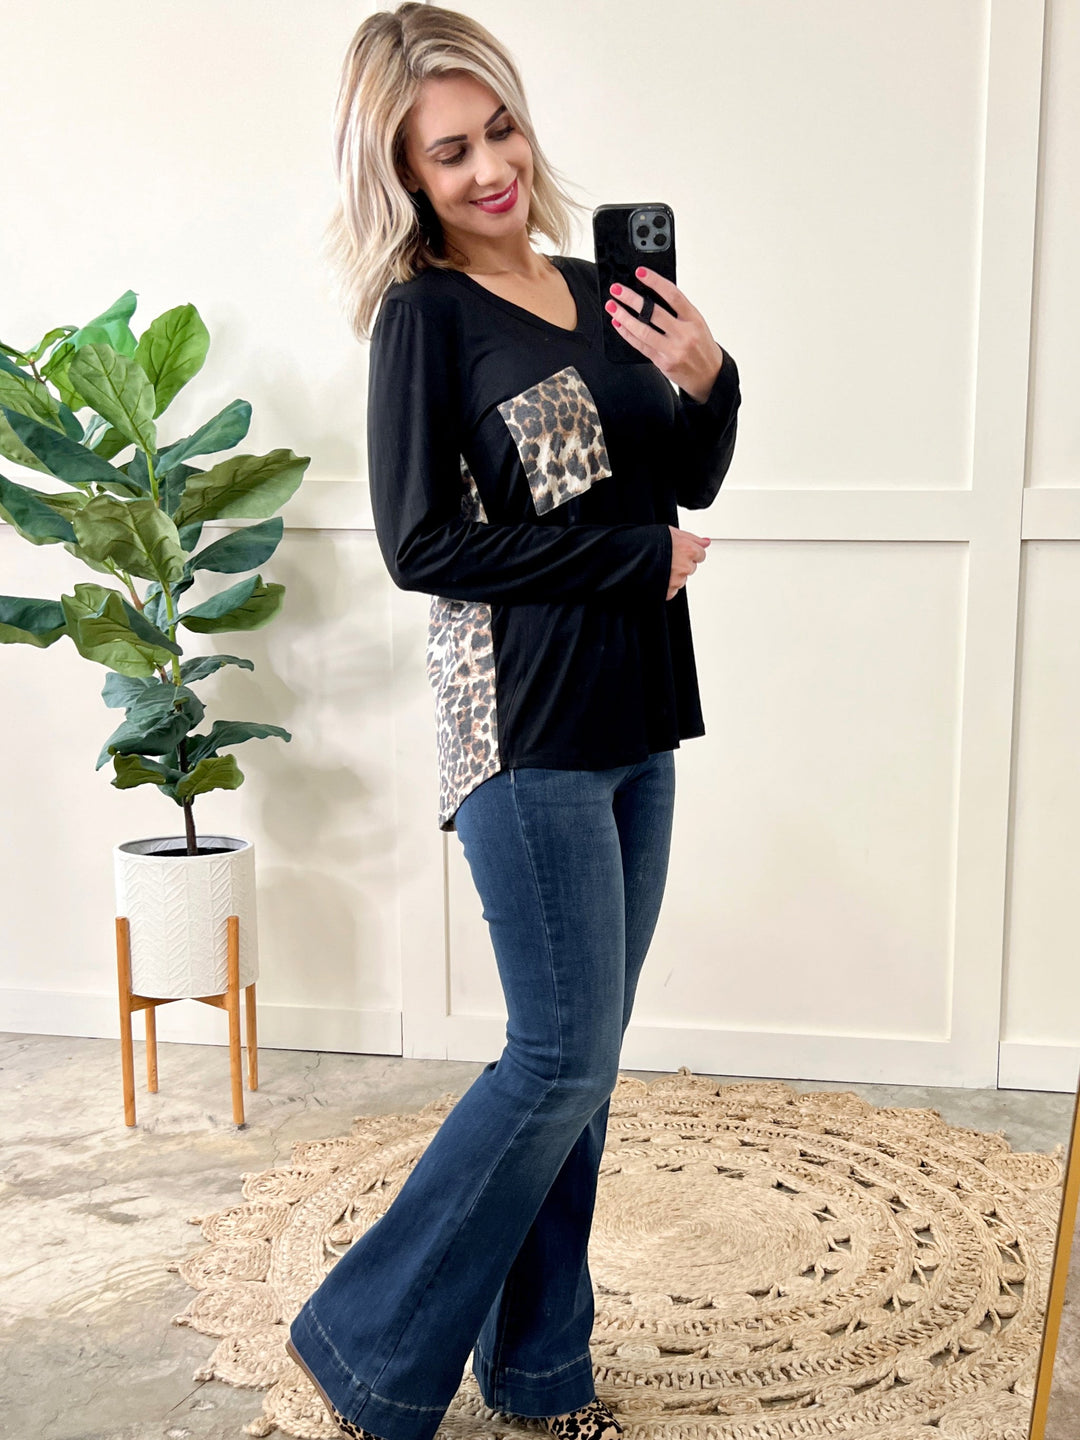 Long Sleeve Pocket Top With Leopard Contrast In Black